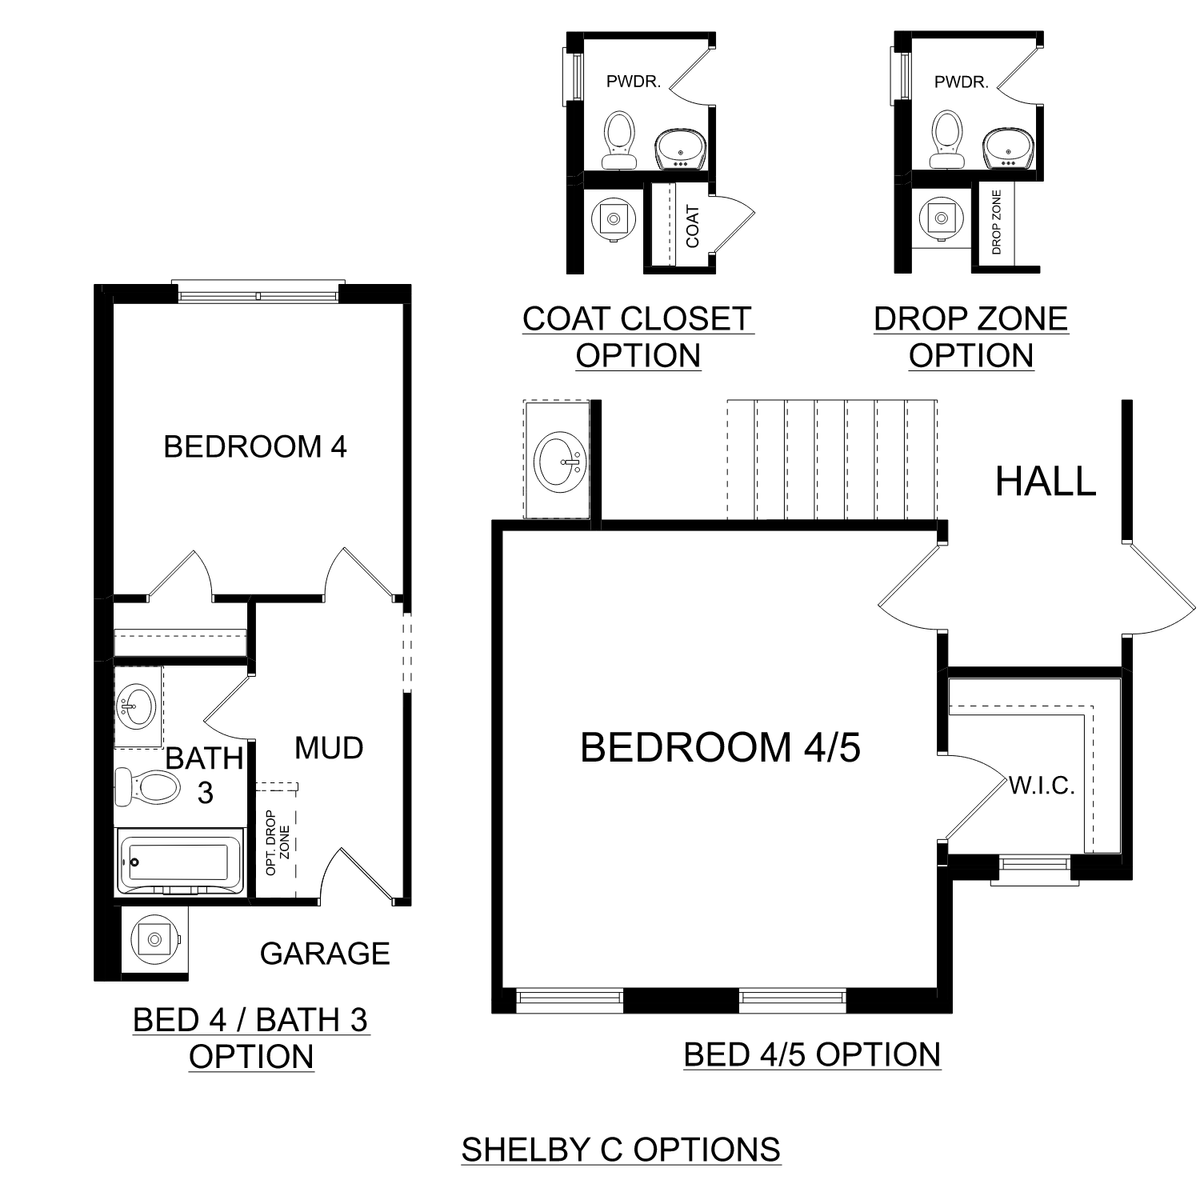 3 - The Shelby C buildable floor plan layout in Davidson Homes' Creekside community.